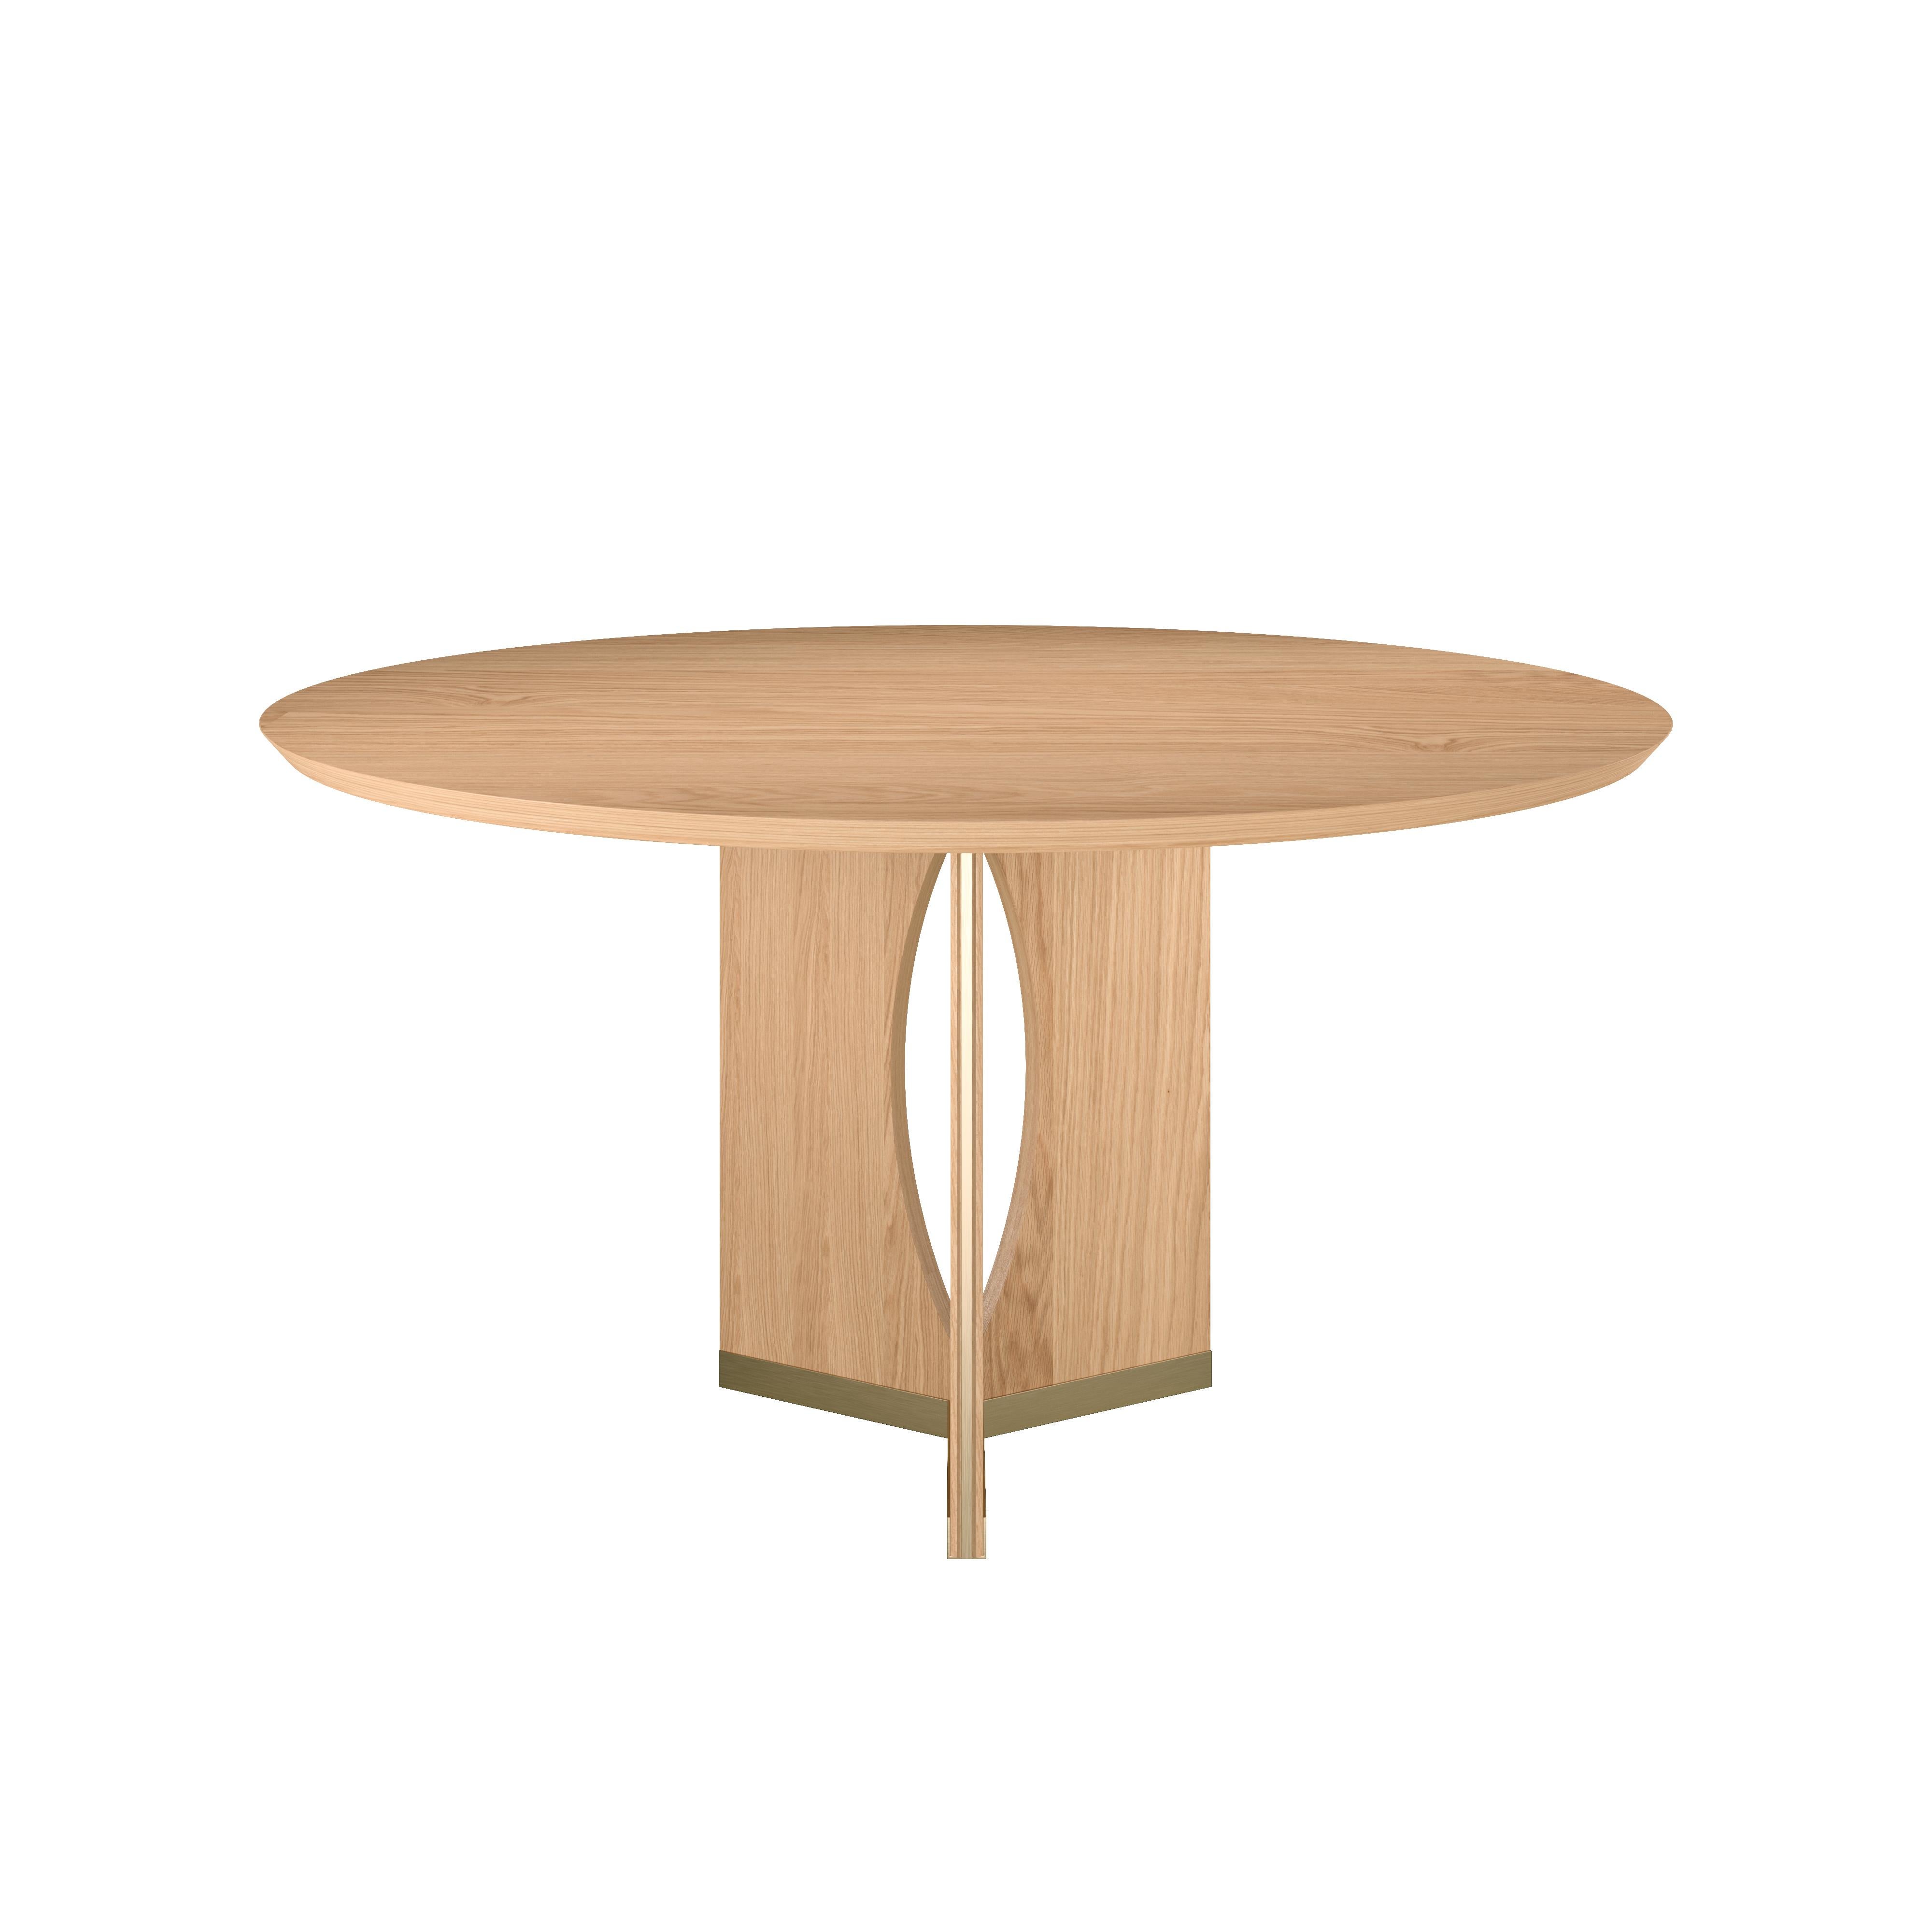 Portuguese 21st Century Taylor Round Dining Table Walnut Wood For Sale